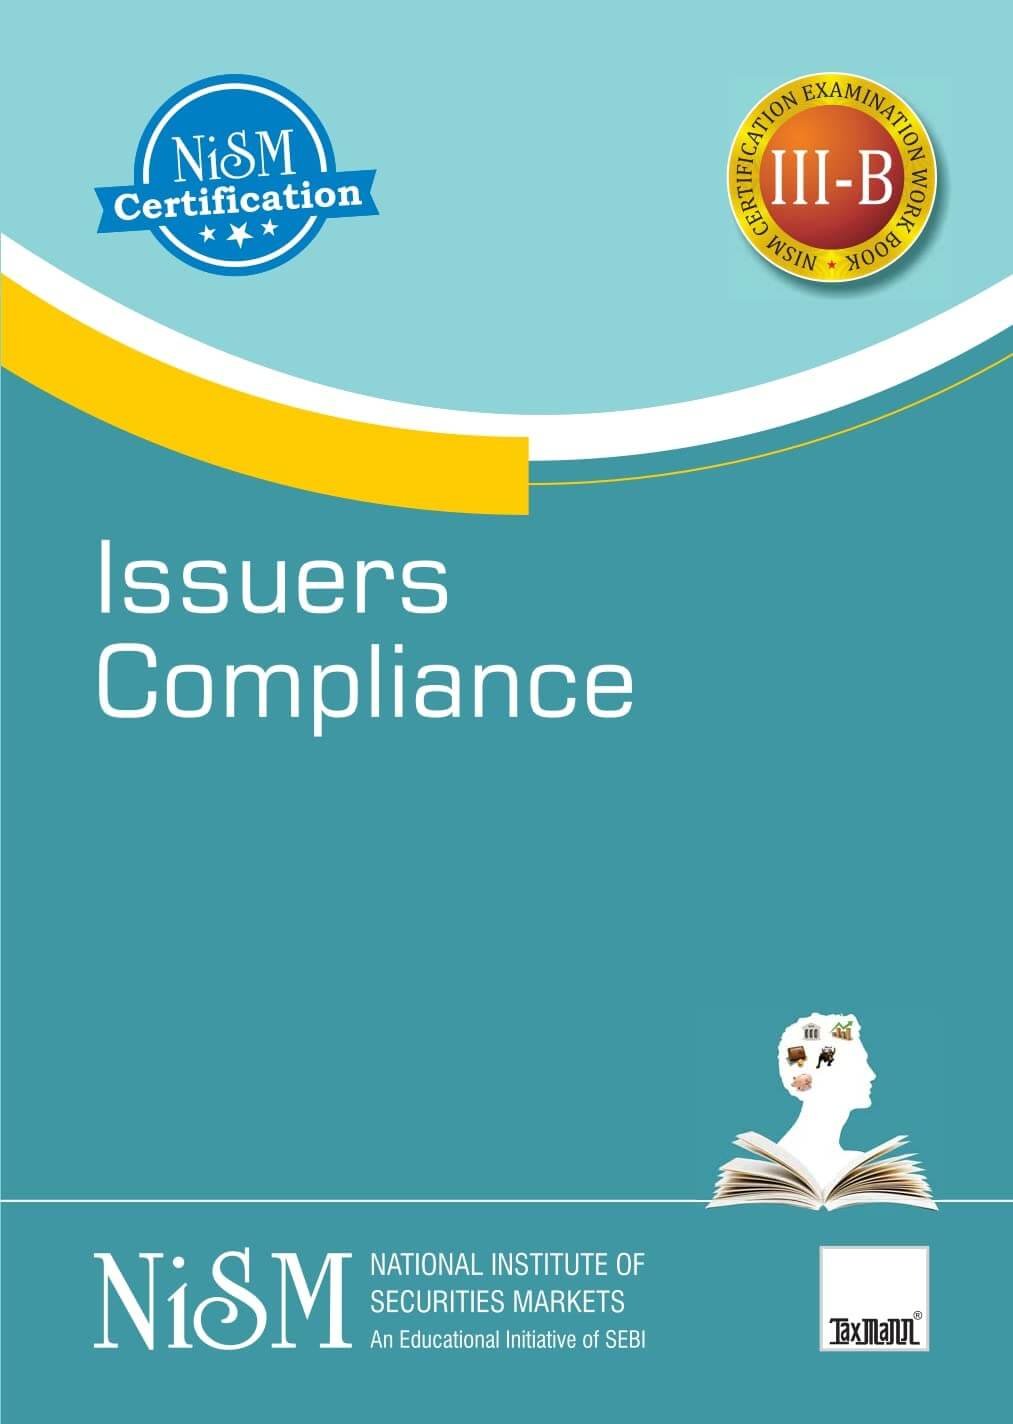 NISM’s Issuers Compliance